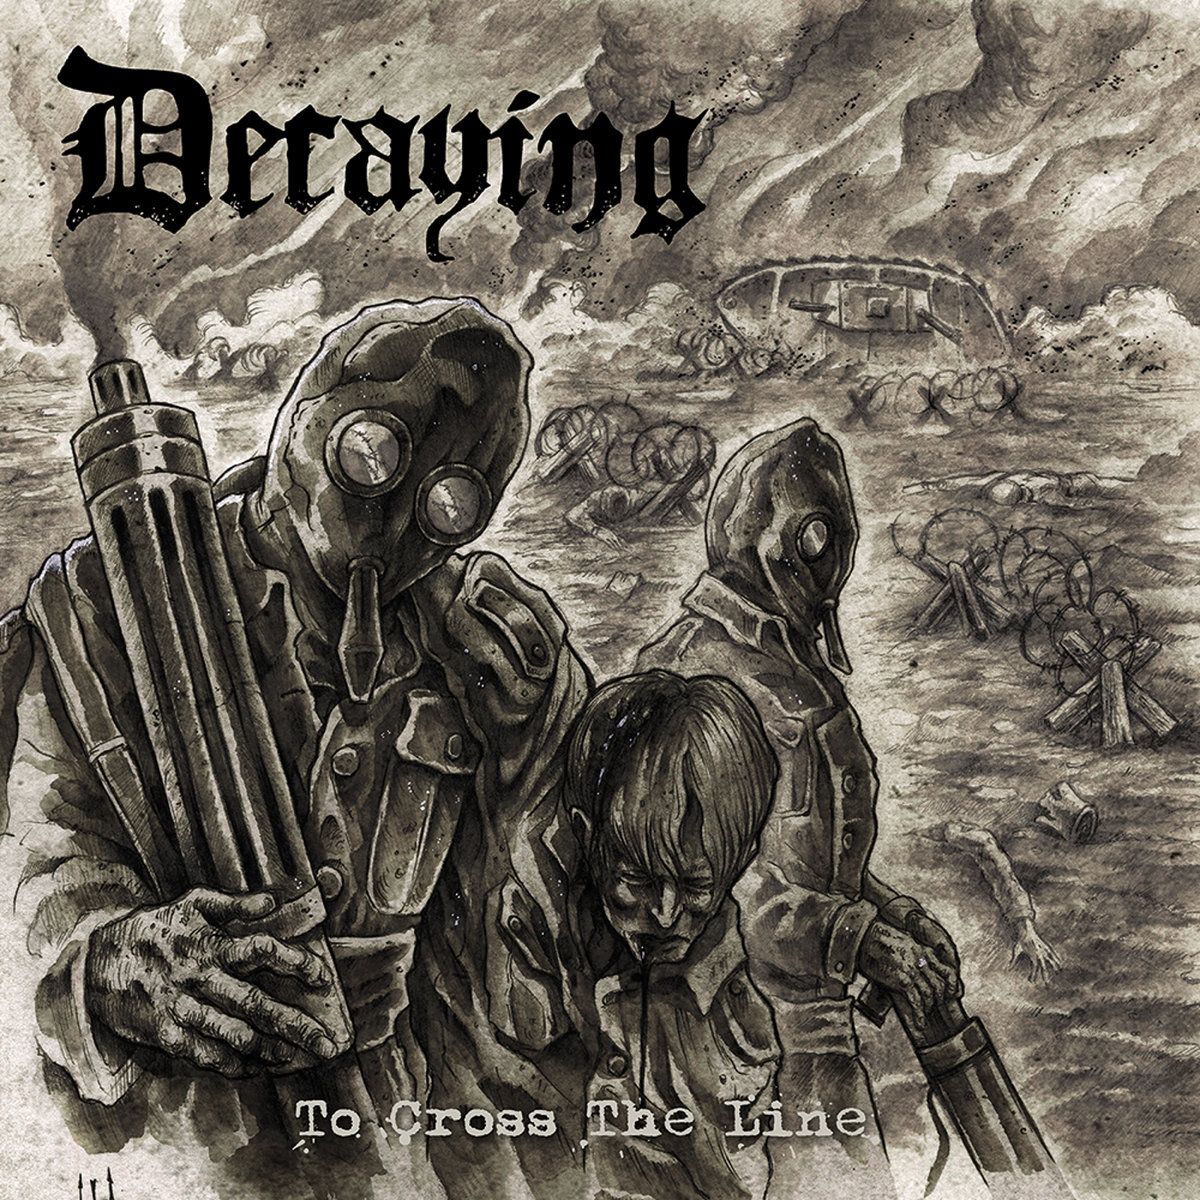 Decaying – To Cross The Line